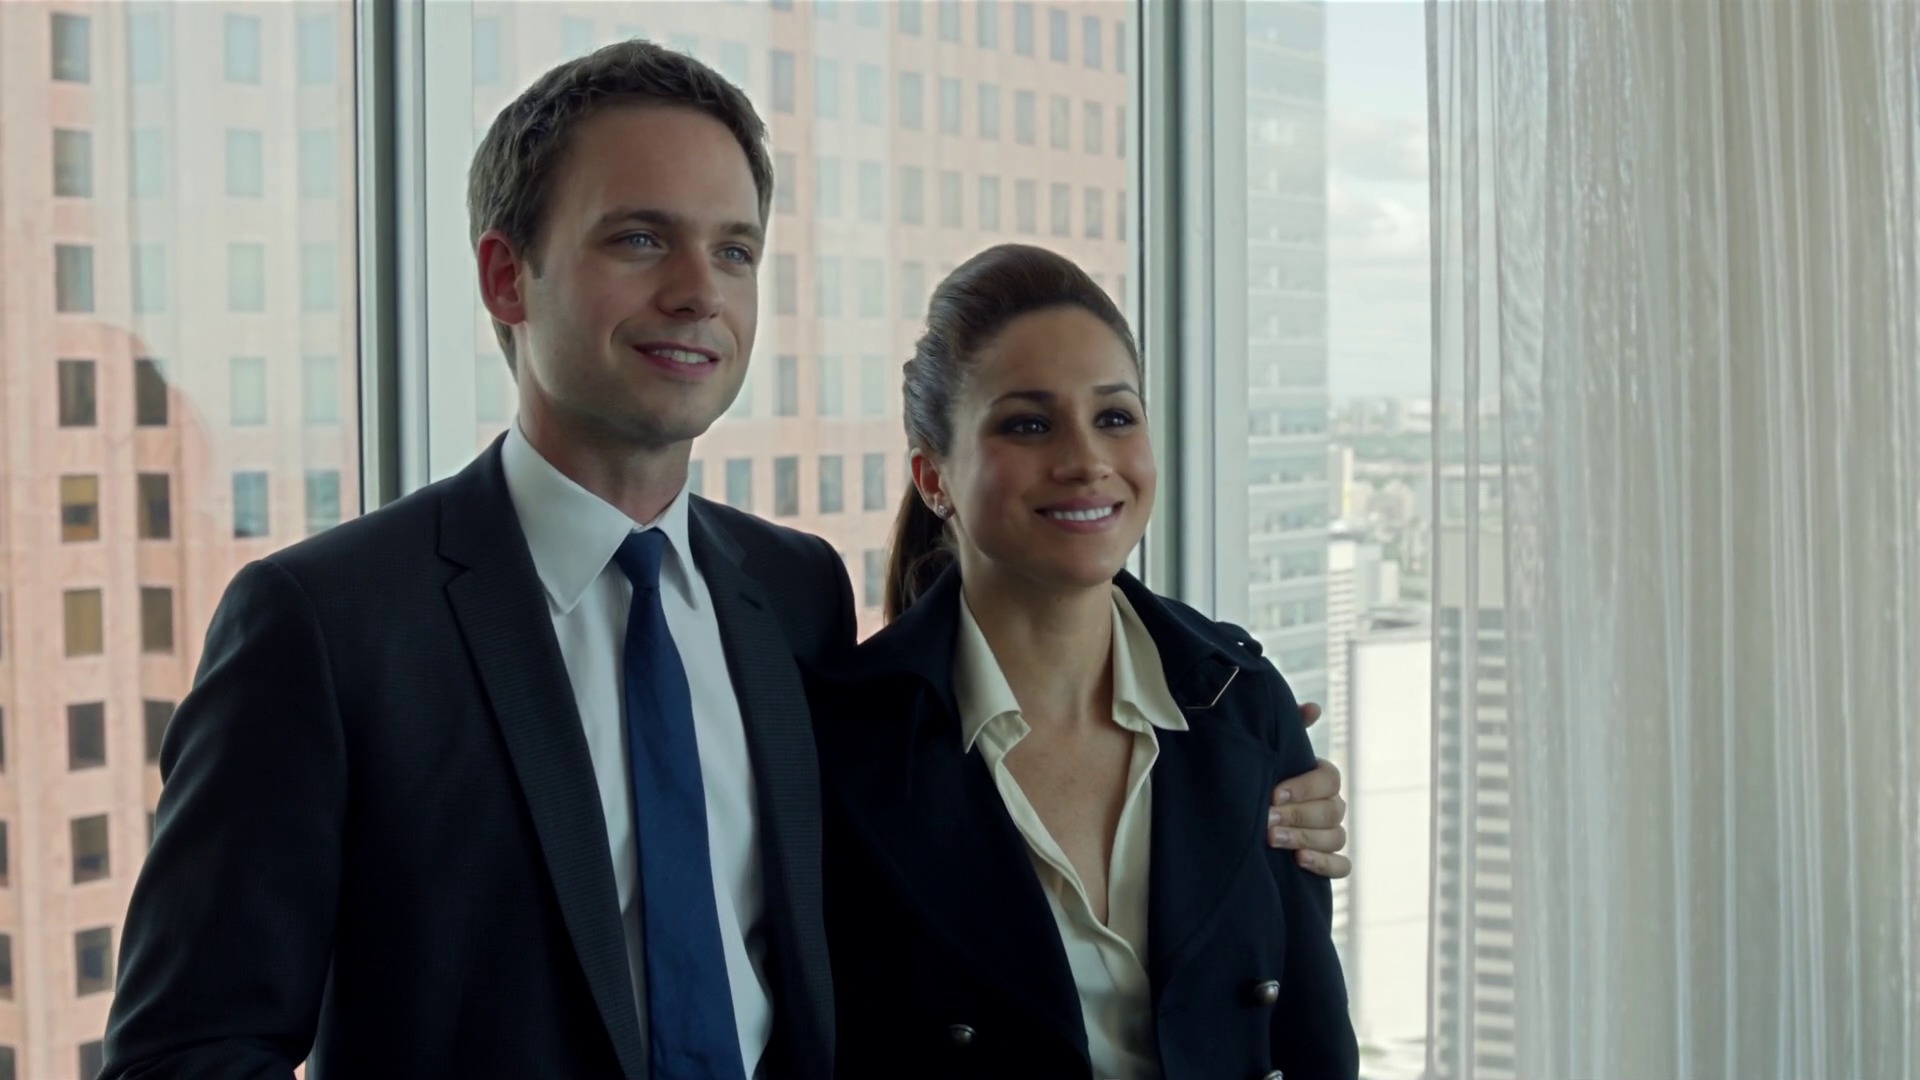 Suits Season 8 Episode 14 release date peas of a pod